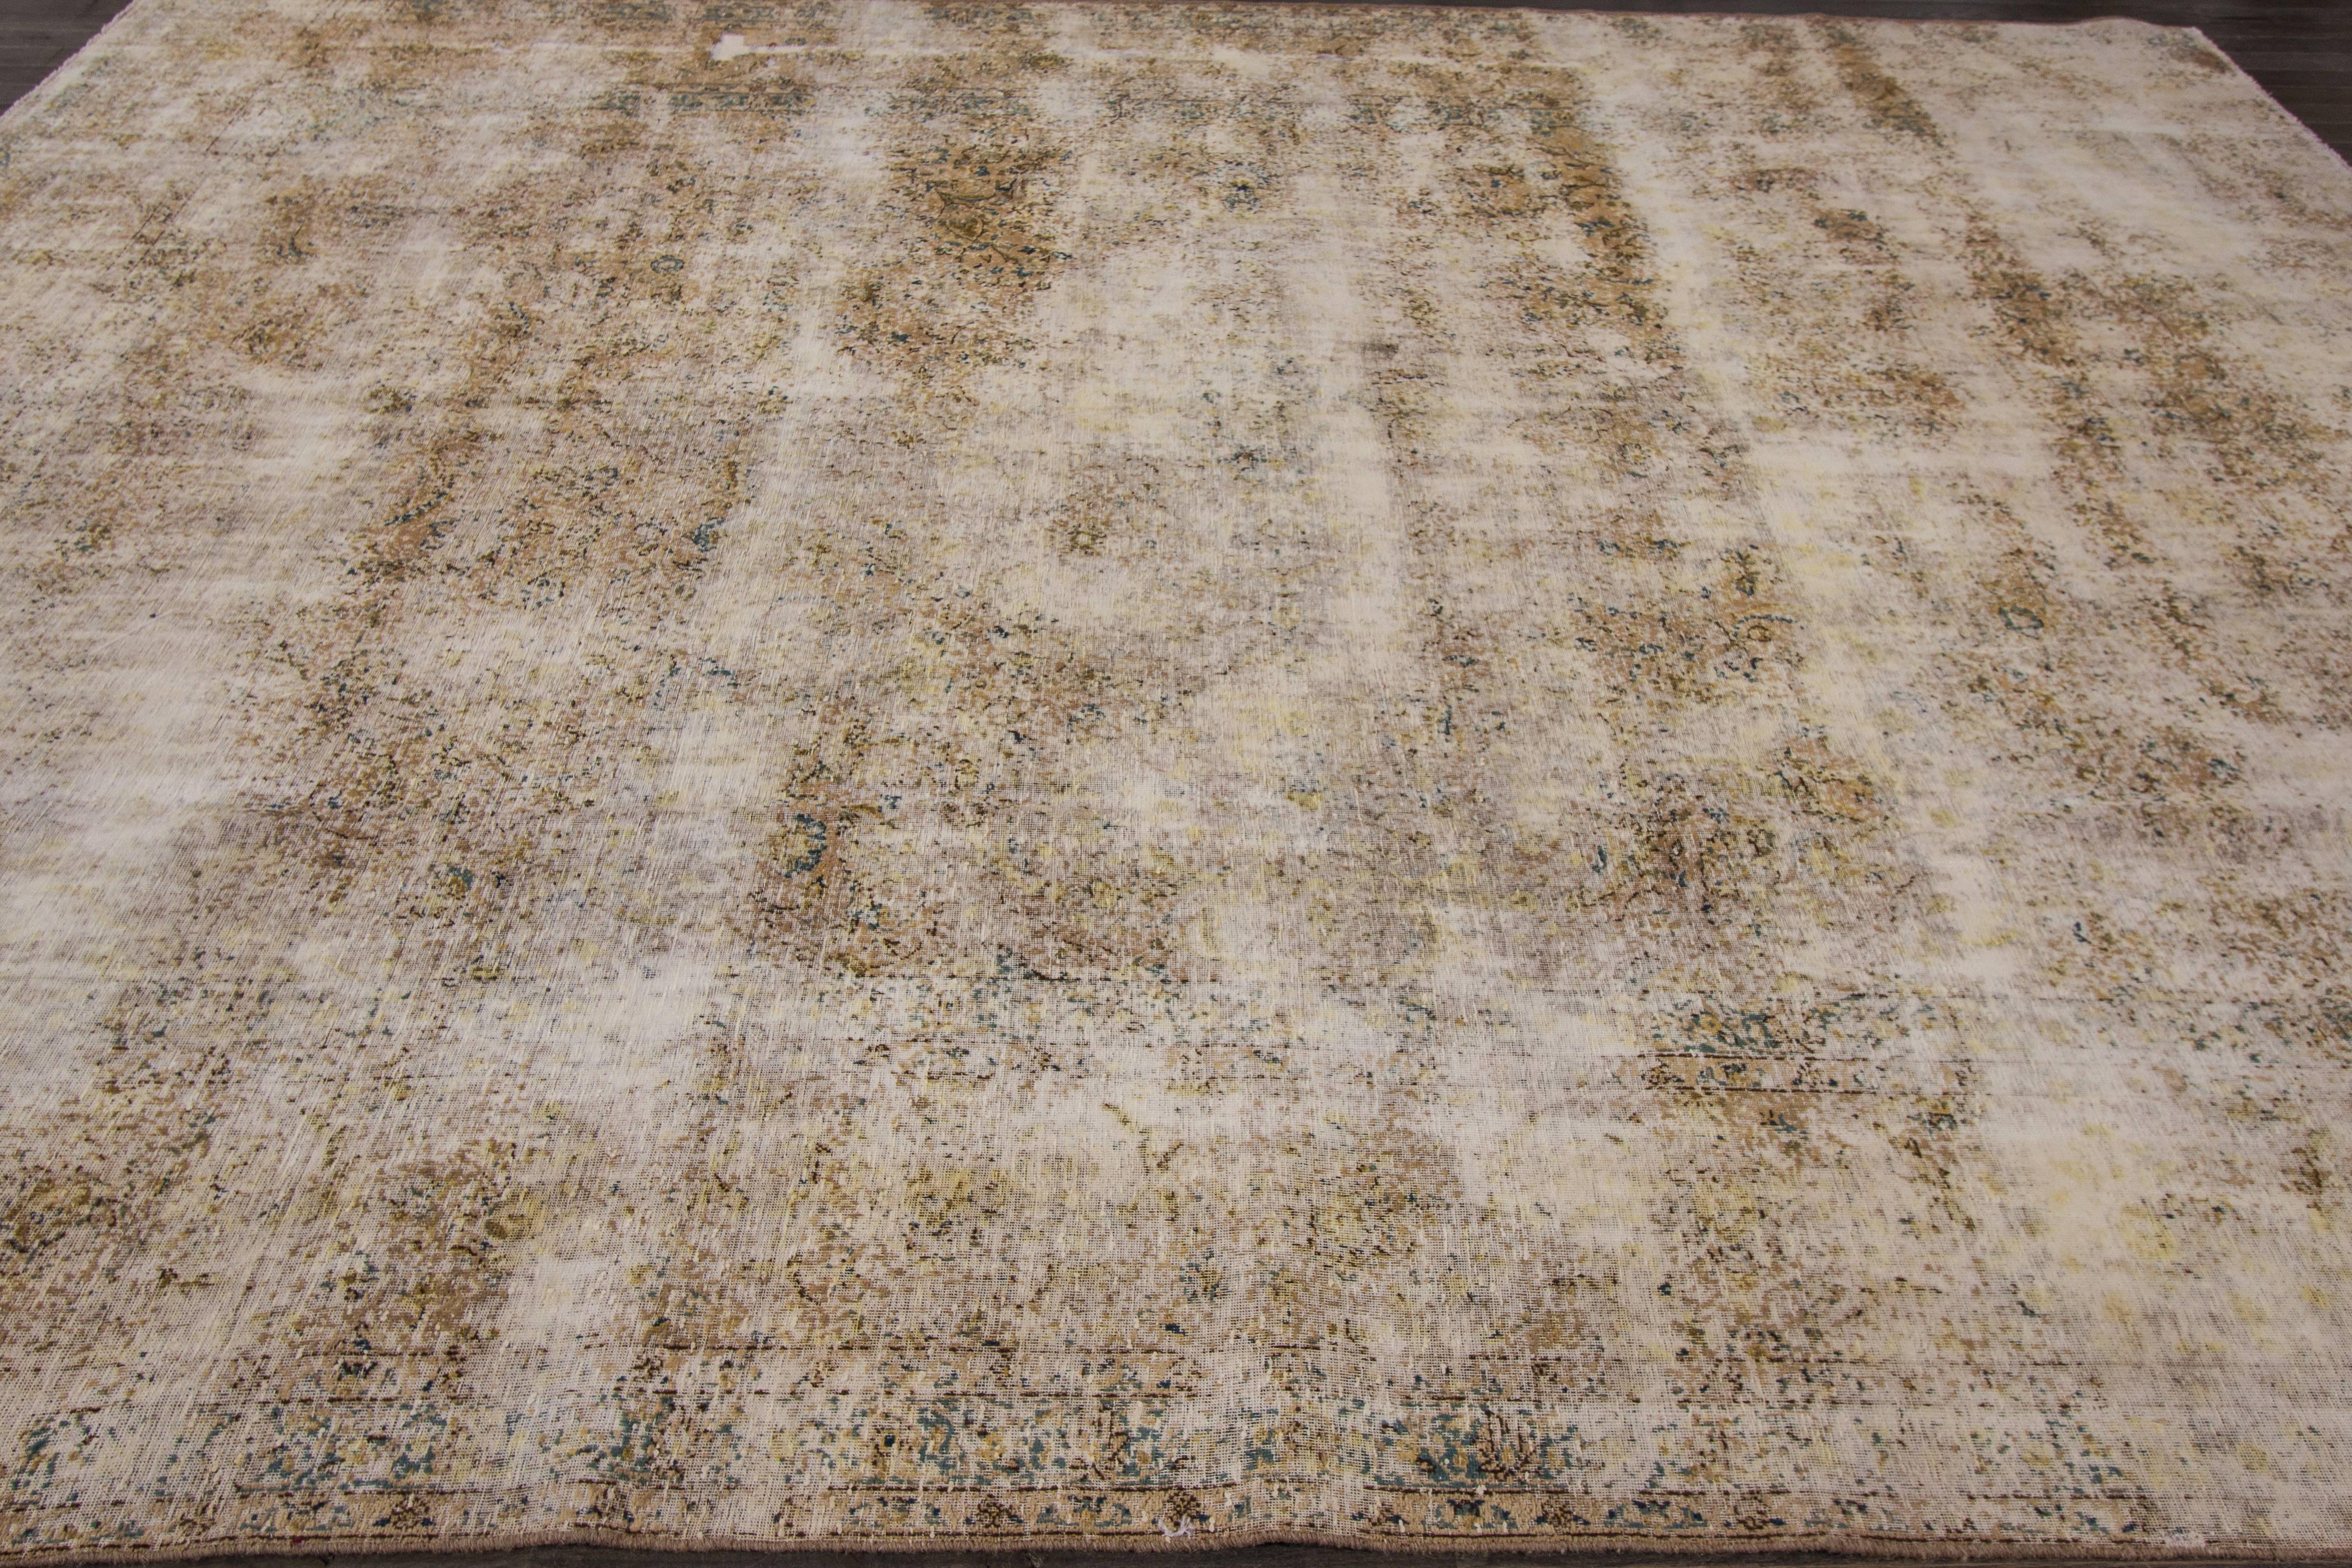 Measures: 9'4" x 12'4"
This beautiful hand-knotted design rug will make your floor look splendid. This collection is made in wool.